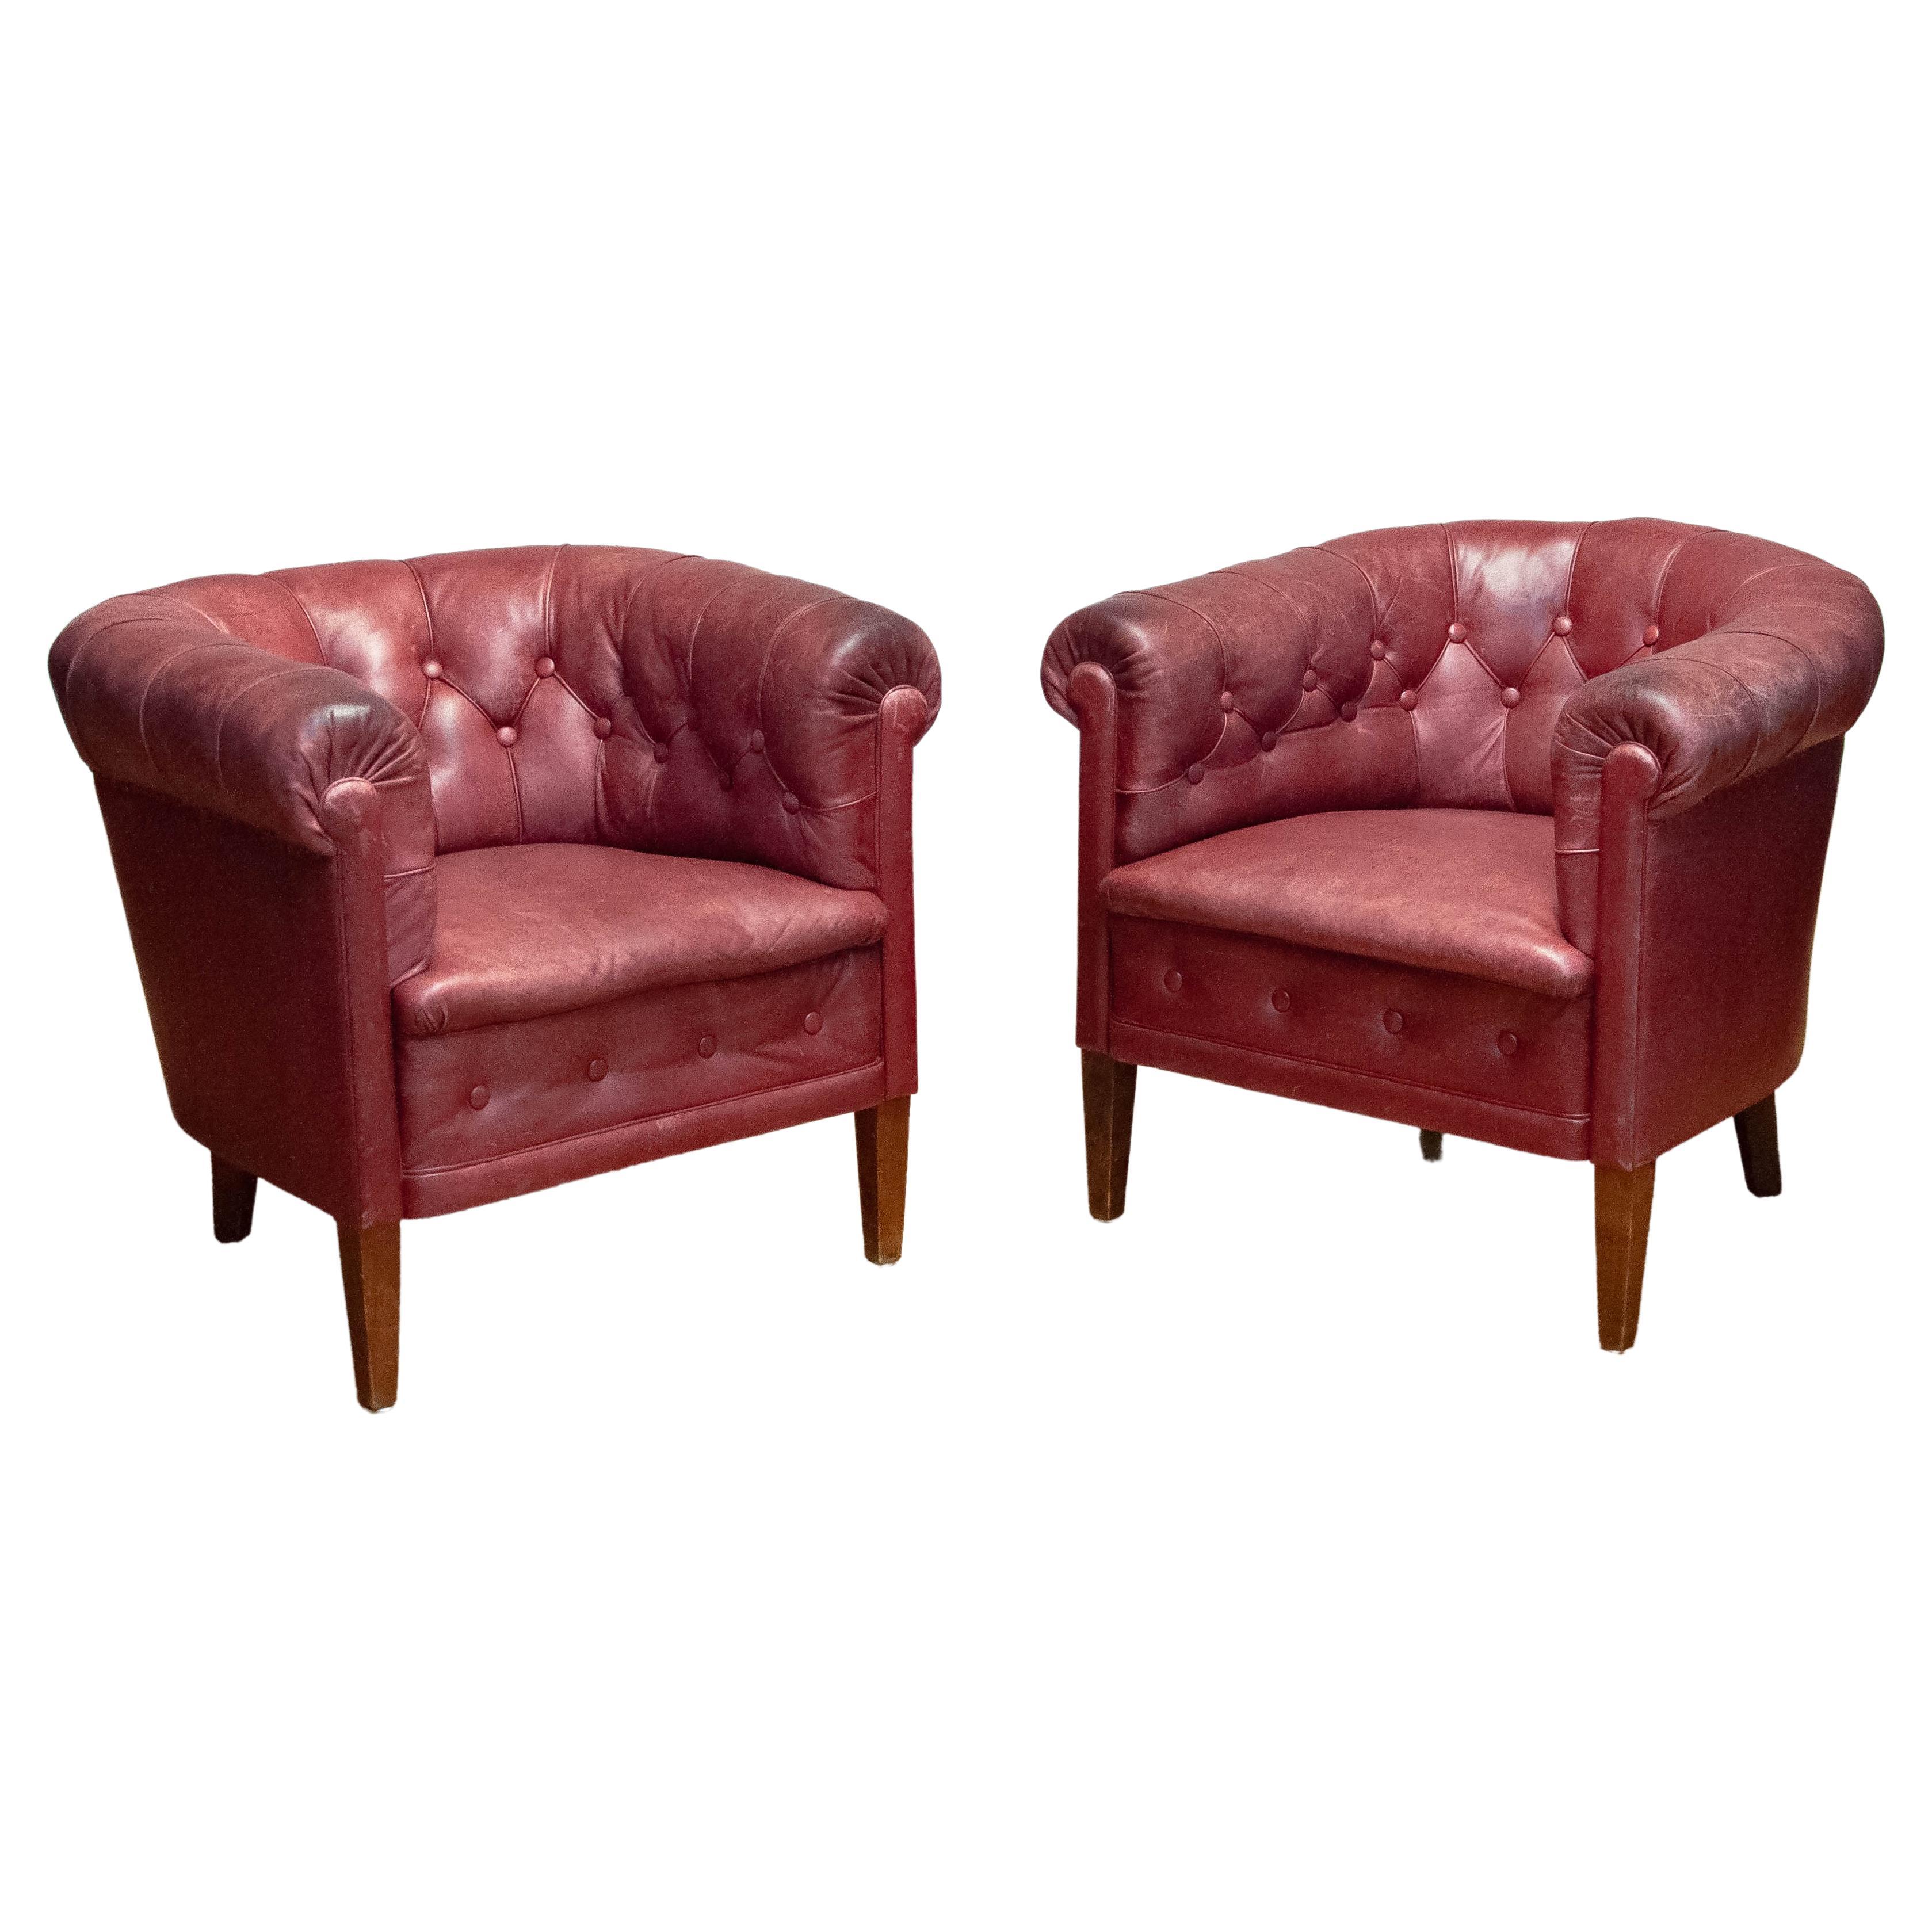 Pair 1930s Swedish Crimson Red Chesterfield Club Chairs in Patinated Leather